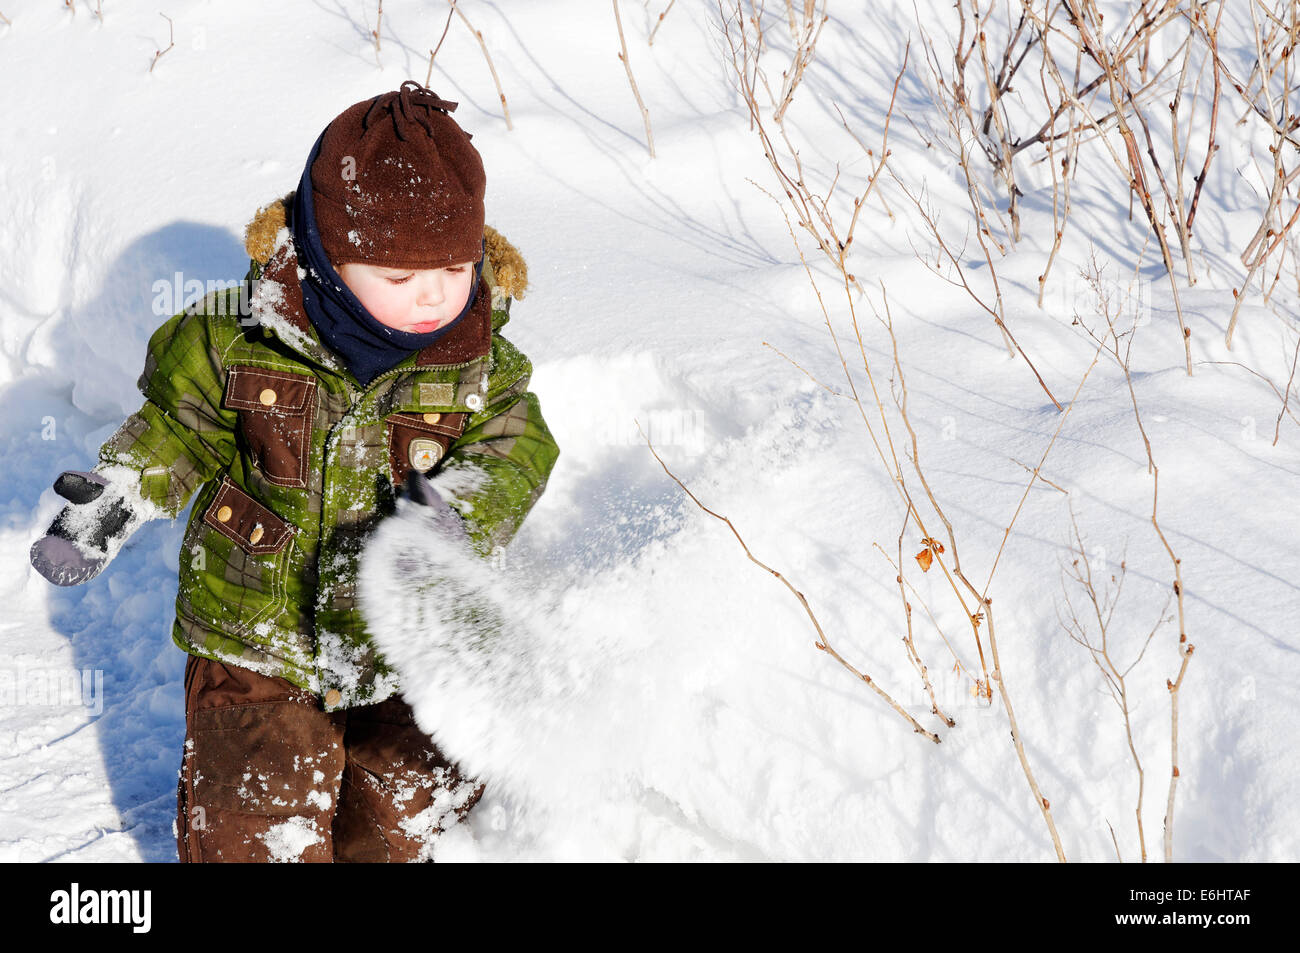 A 2 year old boy playing with fresh snow in Quebec Canada Stock Photo